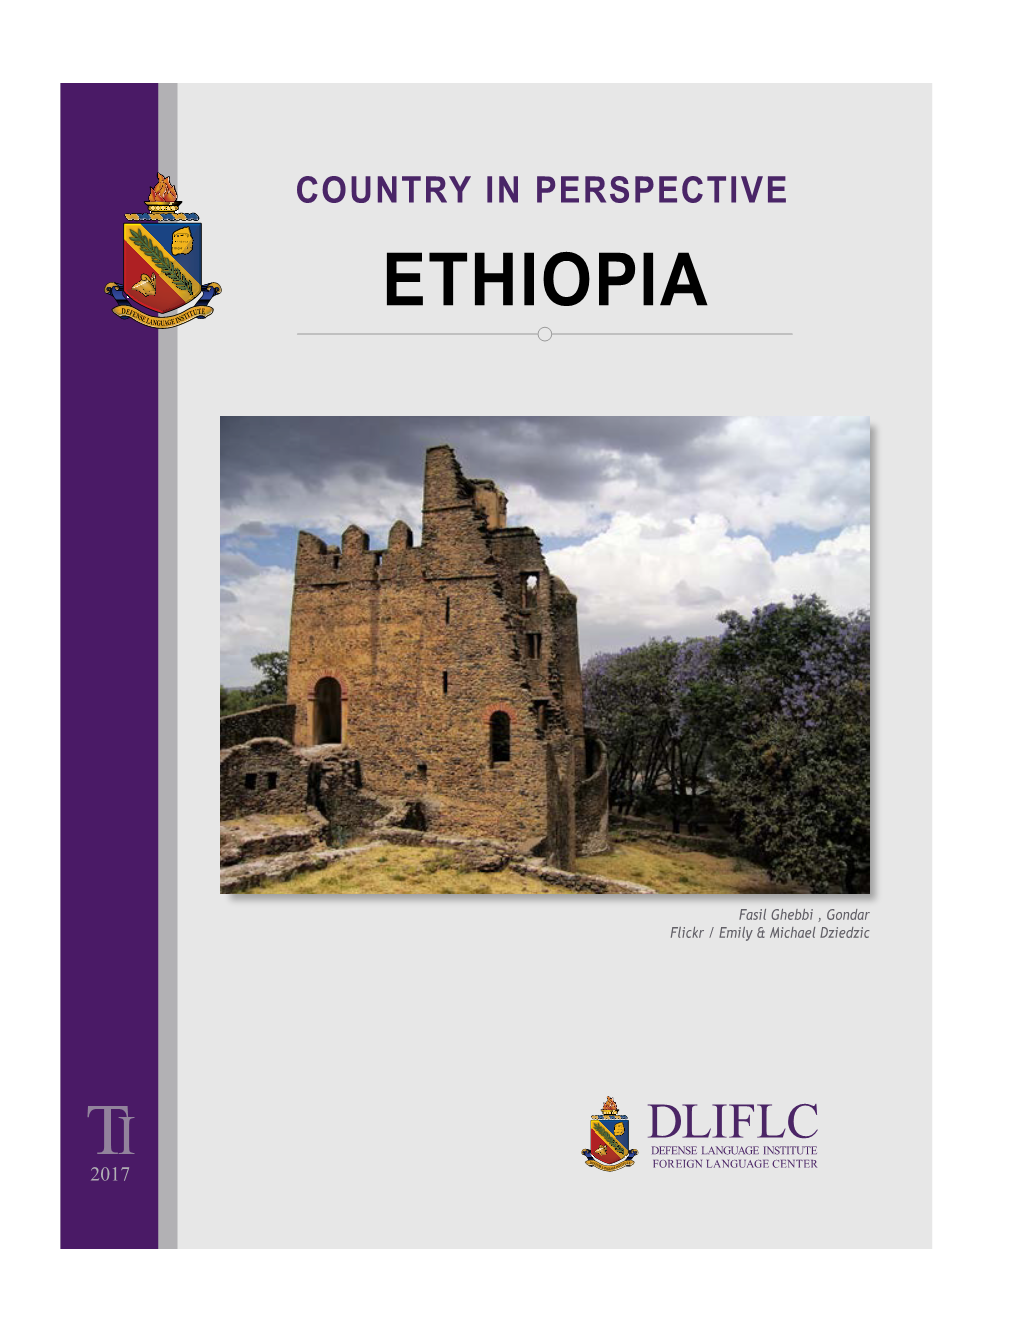 essay about my country ethiopia